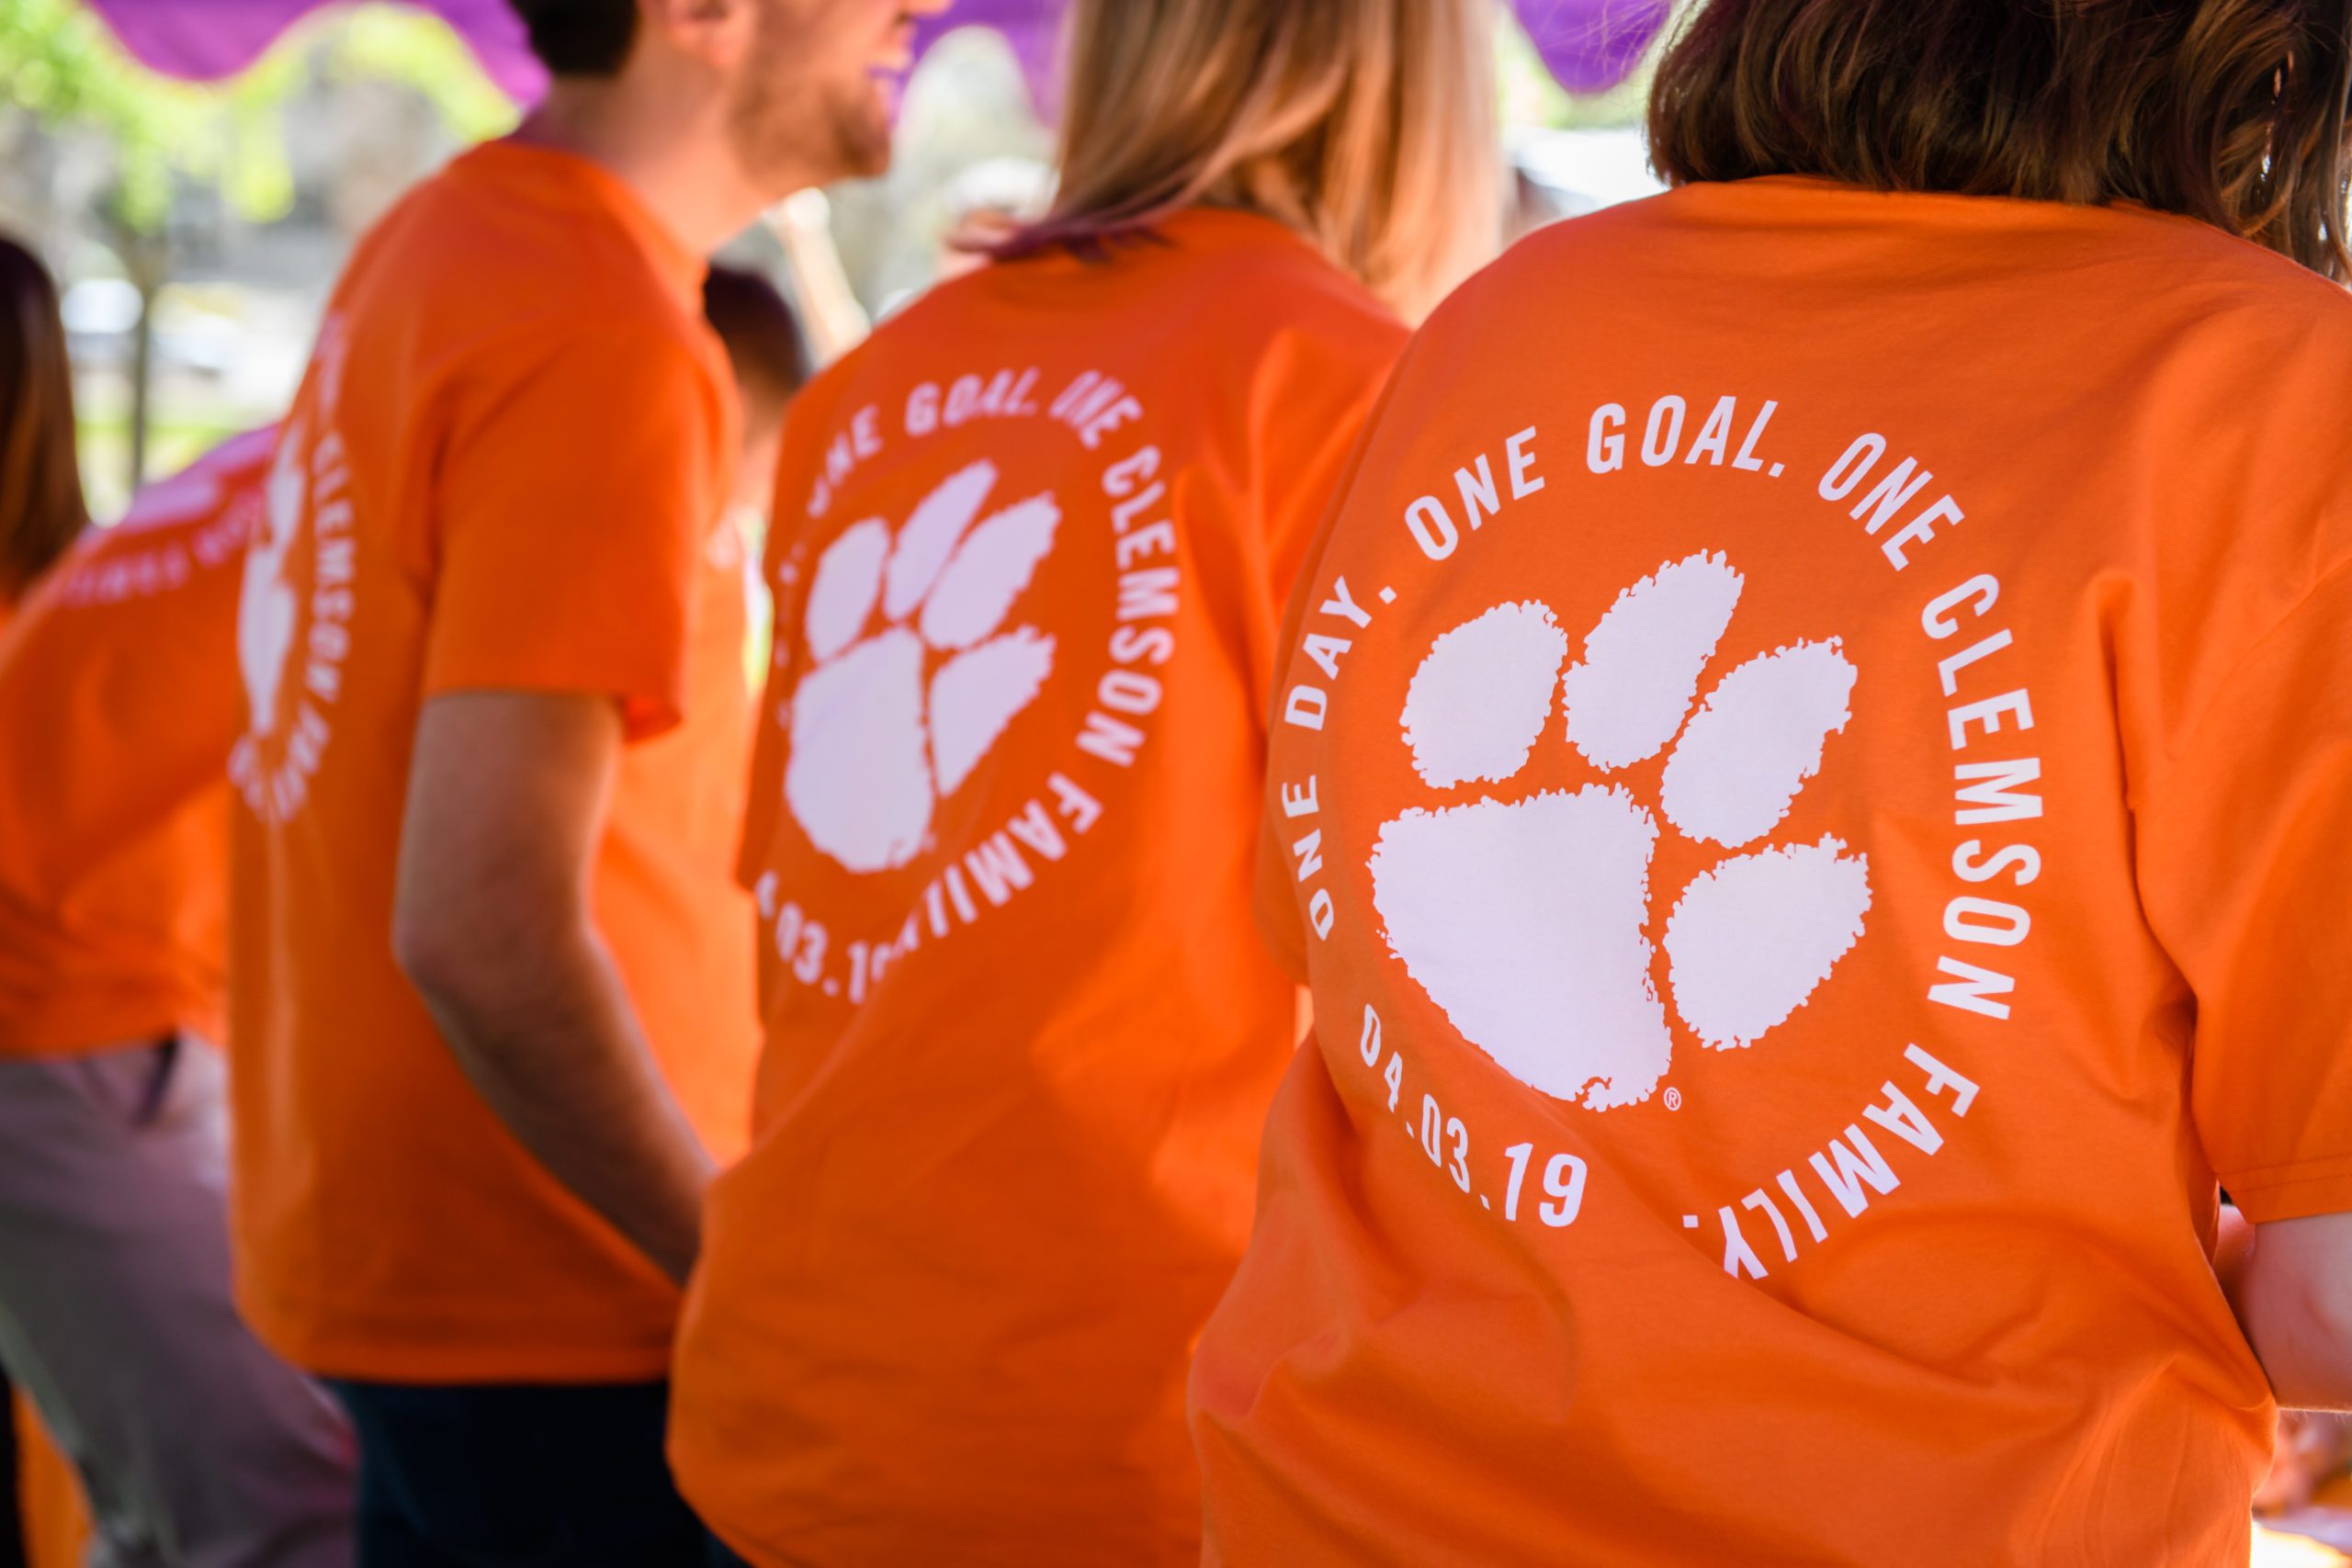 Showing the back of three individuals standing with One Goal. One Clemson on their shirt.